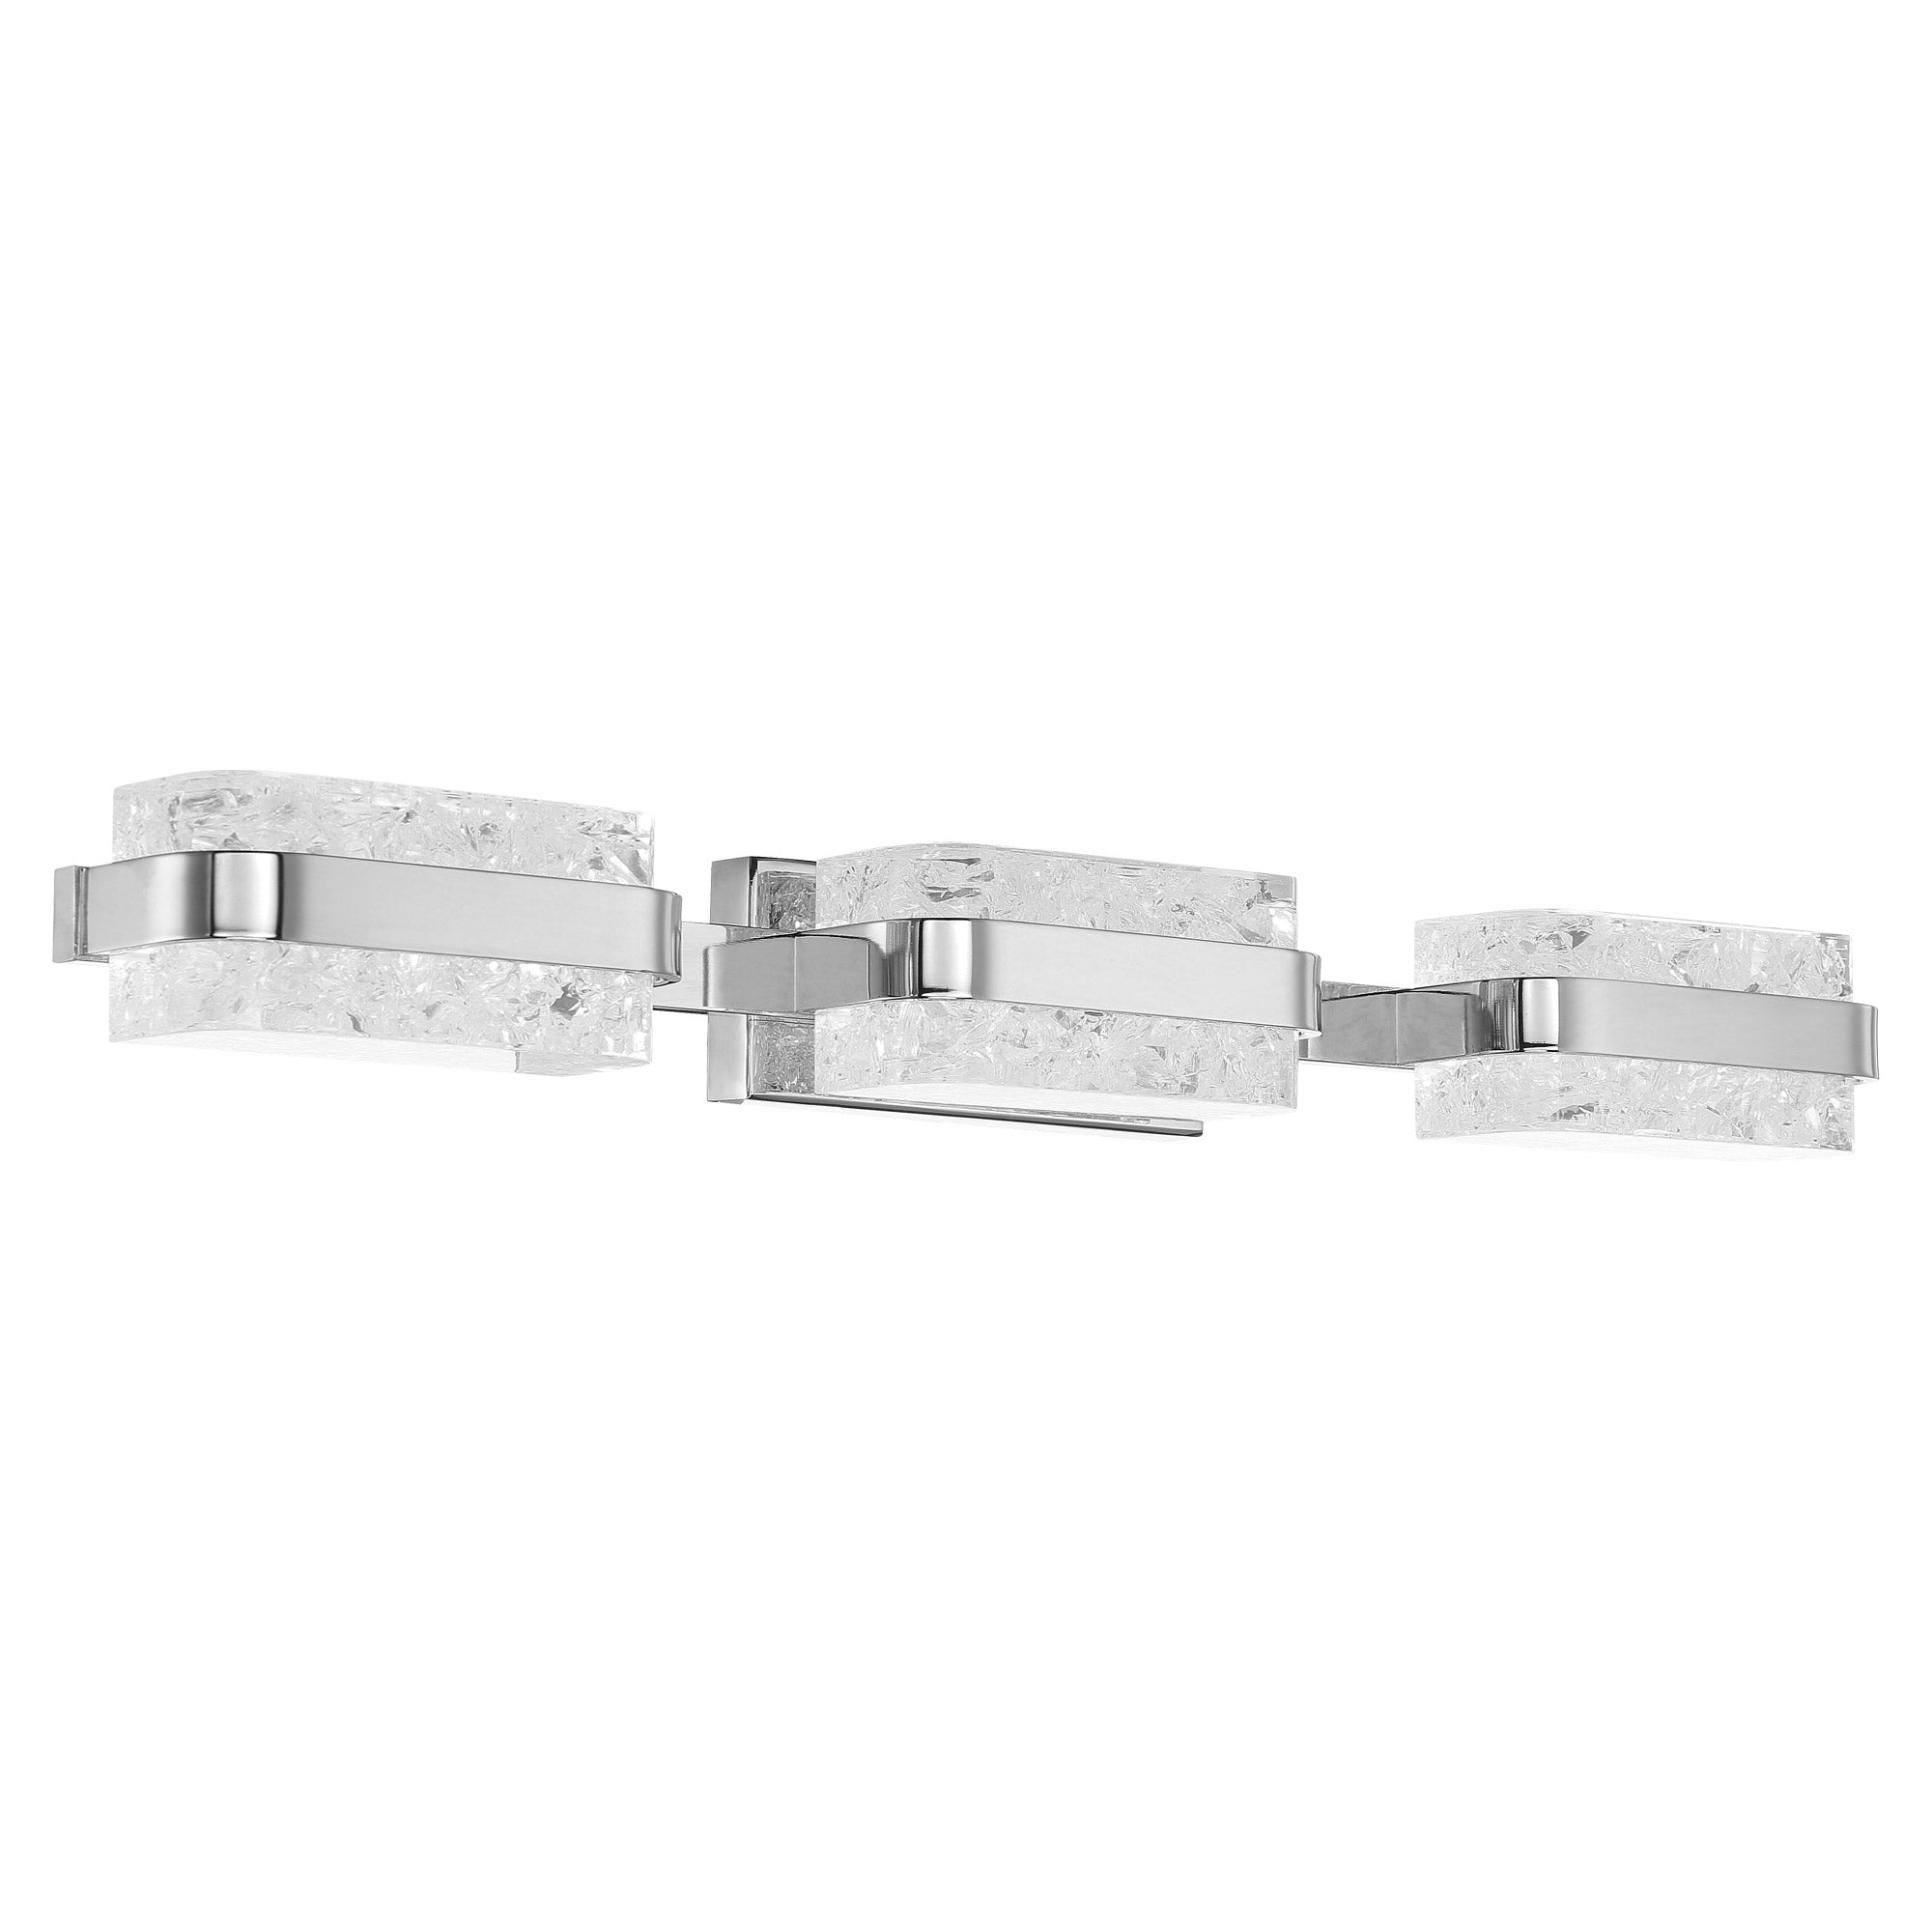 FORBES Bathroom sconce Nickel INTEGRATED LED - WS-63027-PN | MODERN FORMS